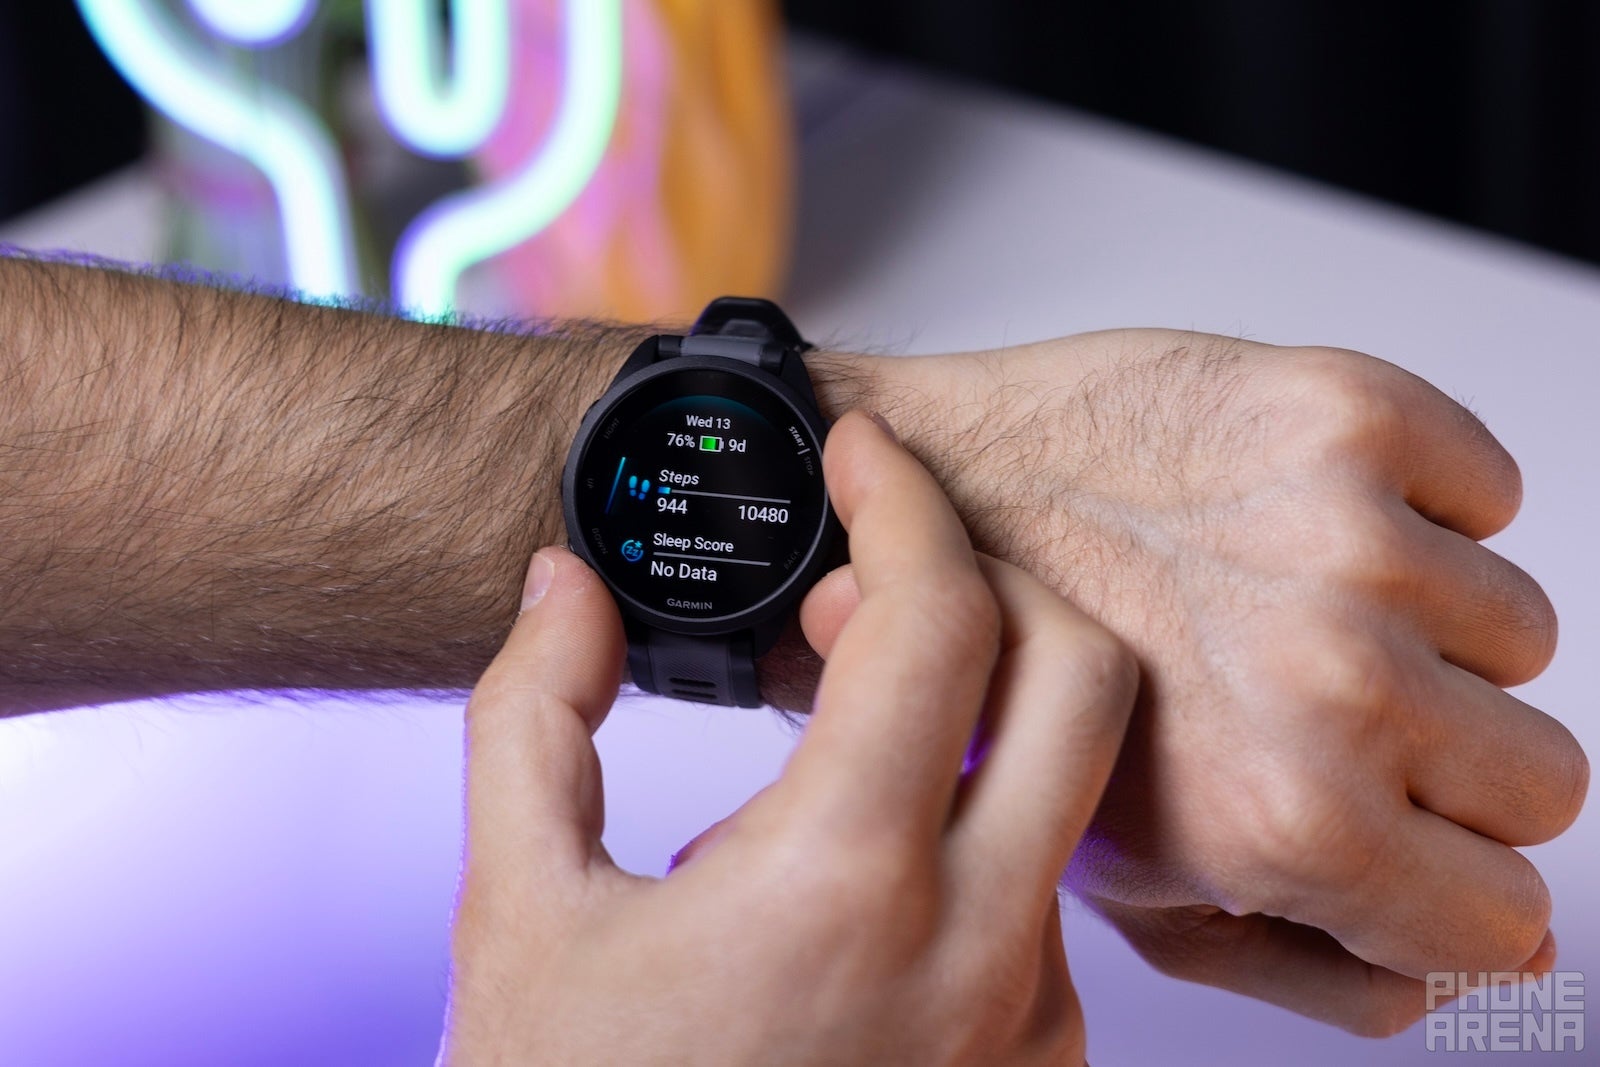 Swipe up and down (or use the up-down buttons) to view different Glances in GarminOS (Image by PhoneArena) - Garmin Forerunner 165 Review: The new default Garmin sports watch